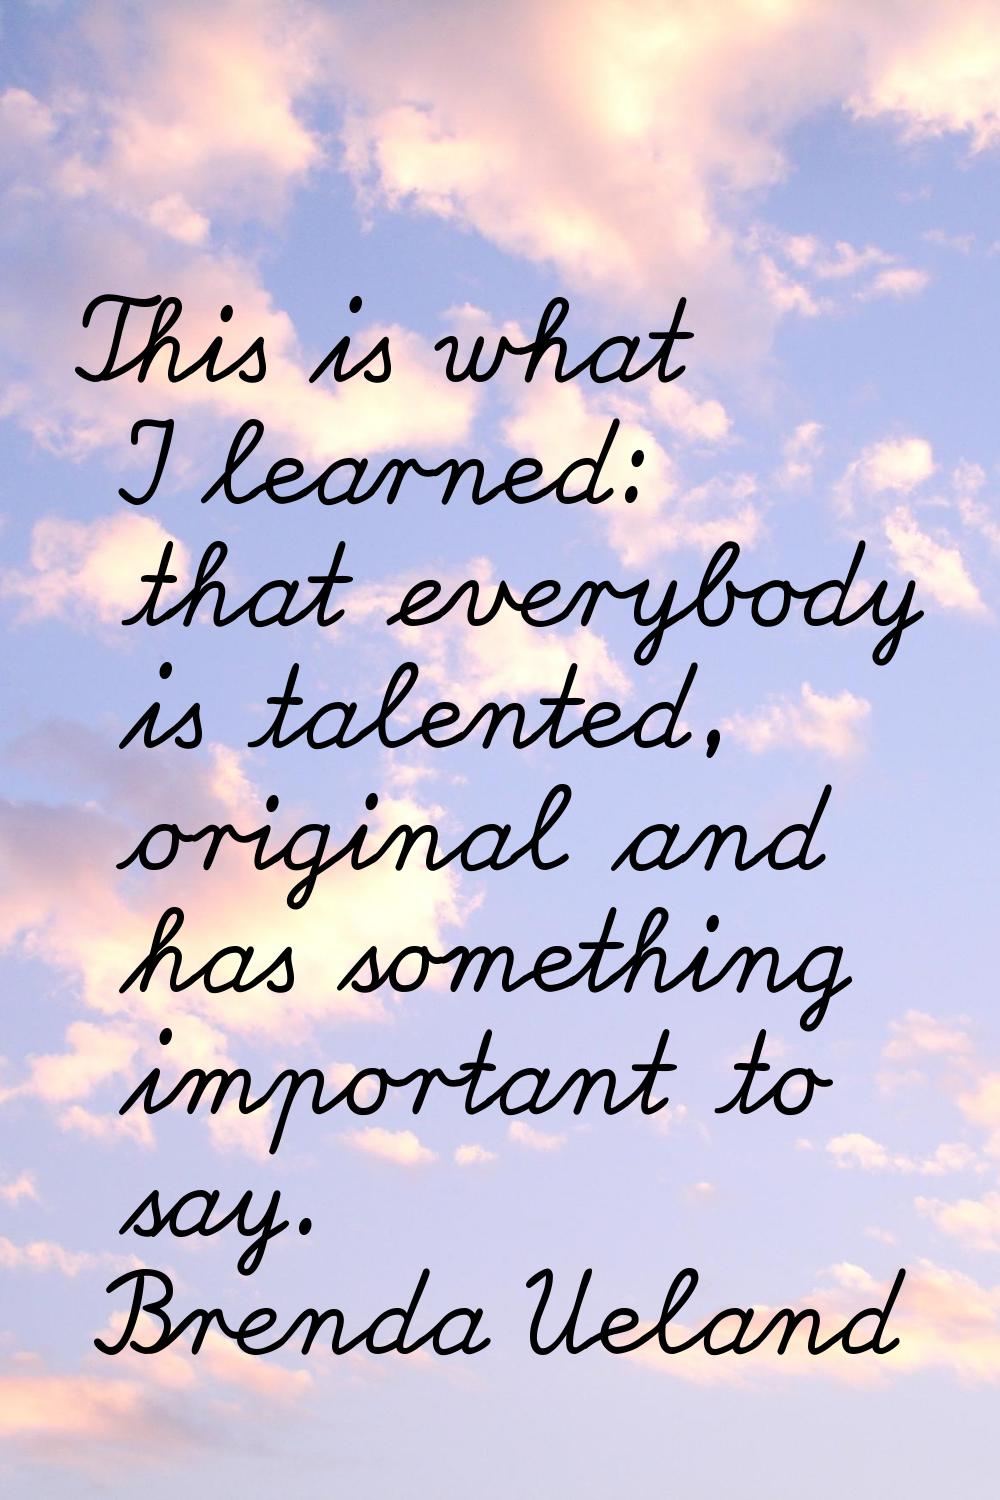 This is what I learned: that everybody is talented, original and has something important to say.